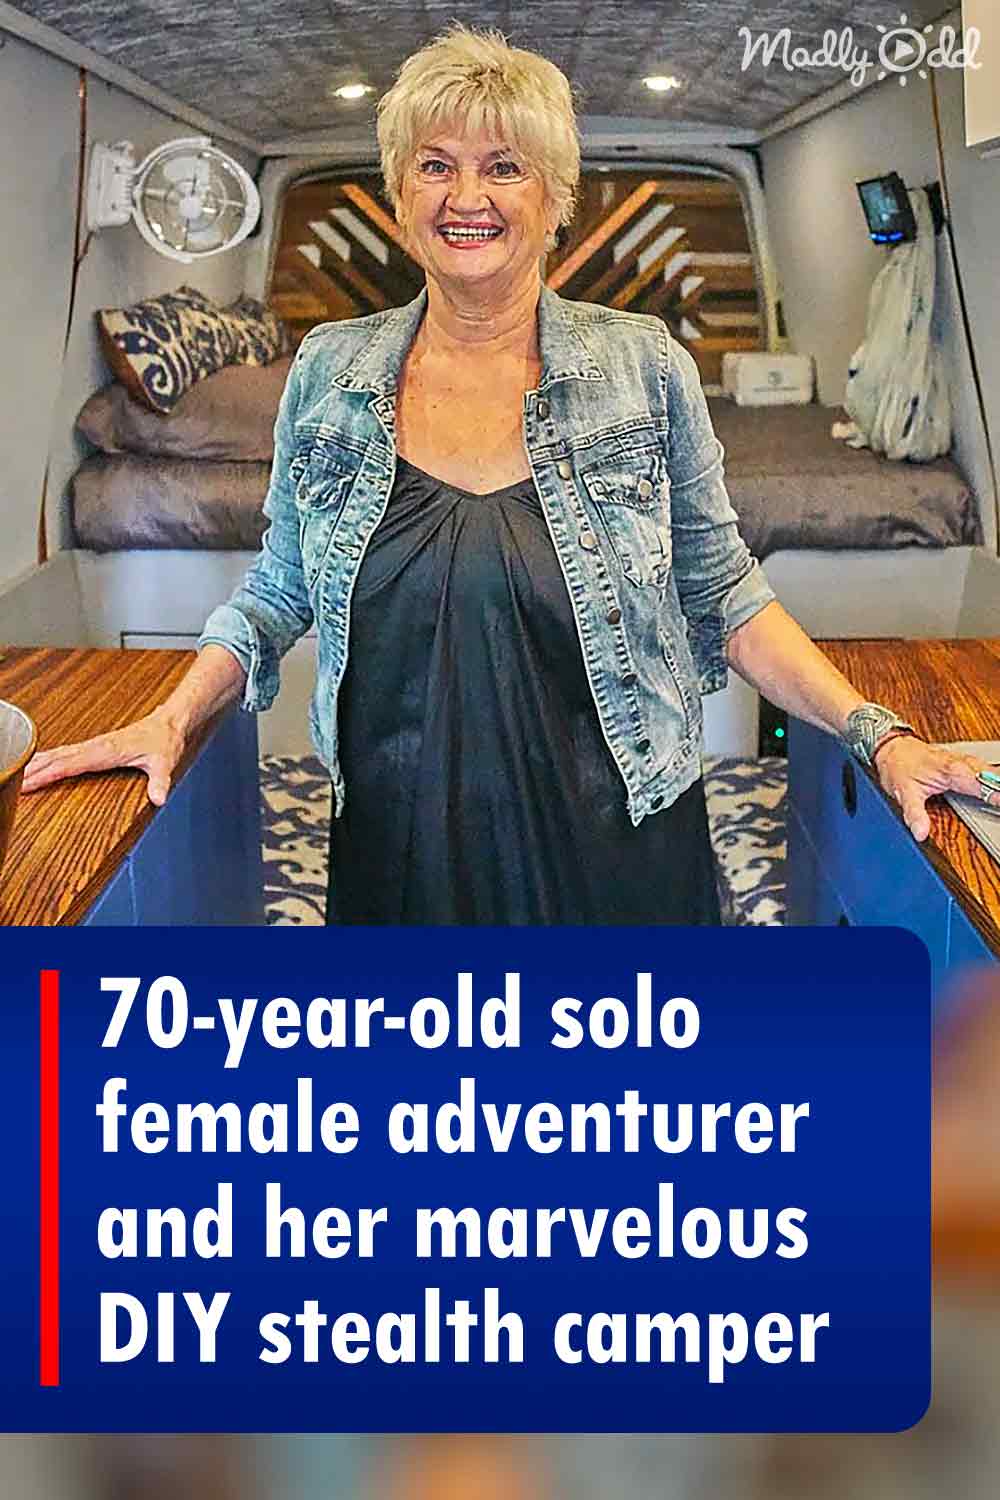 70-year-old solo female adventurer and her marvelous DIY stealth camper